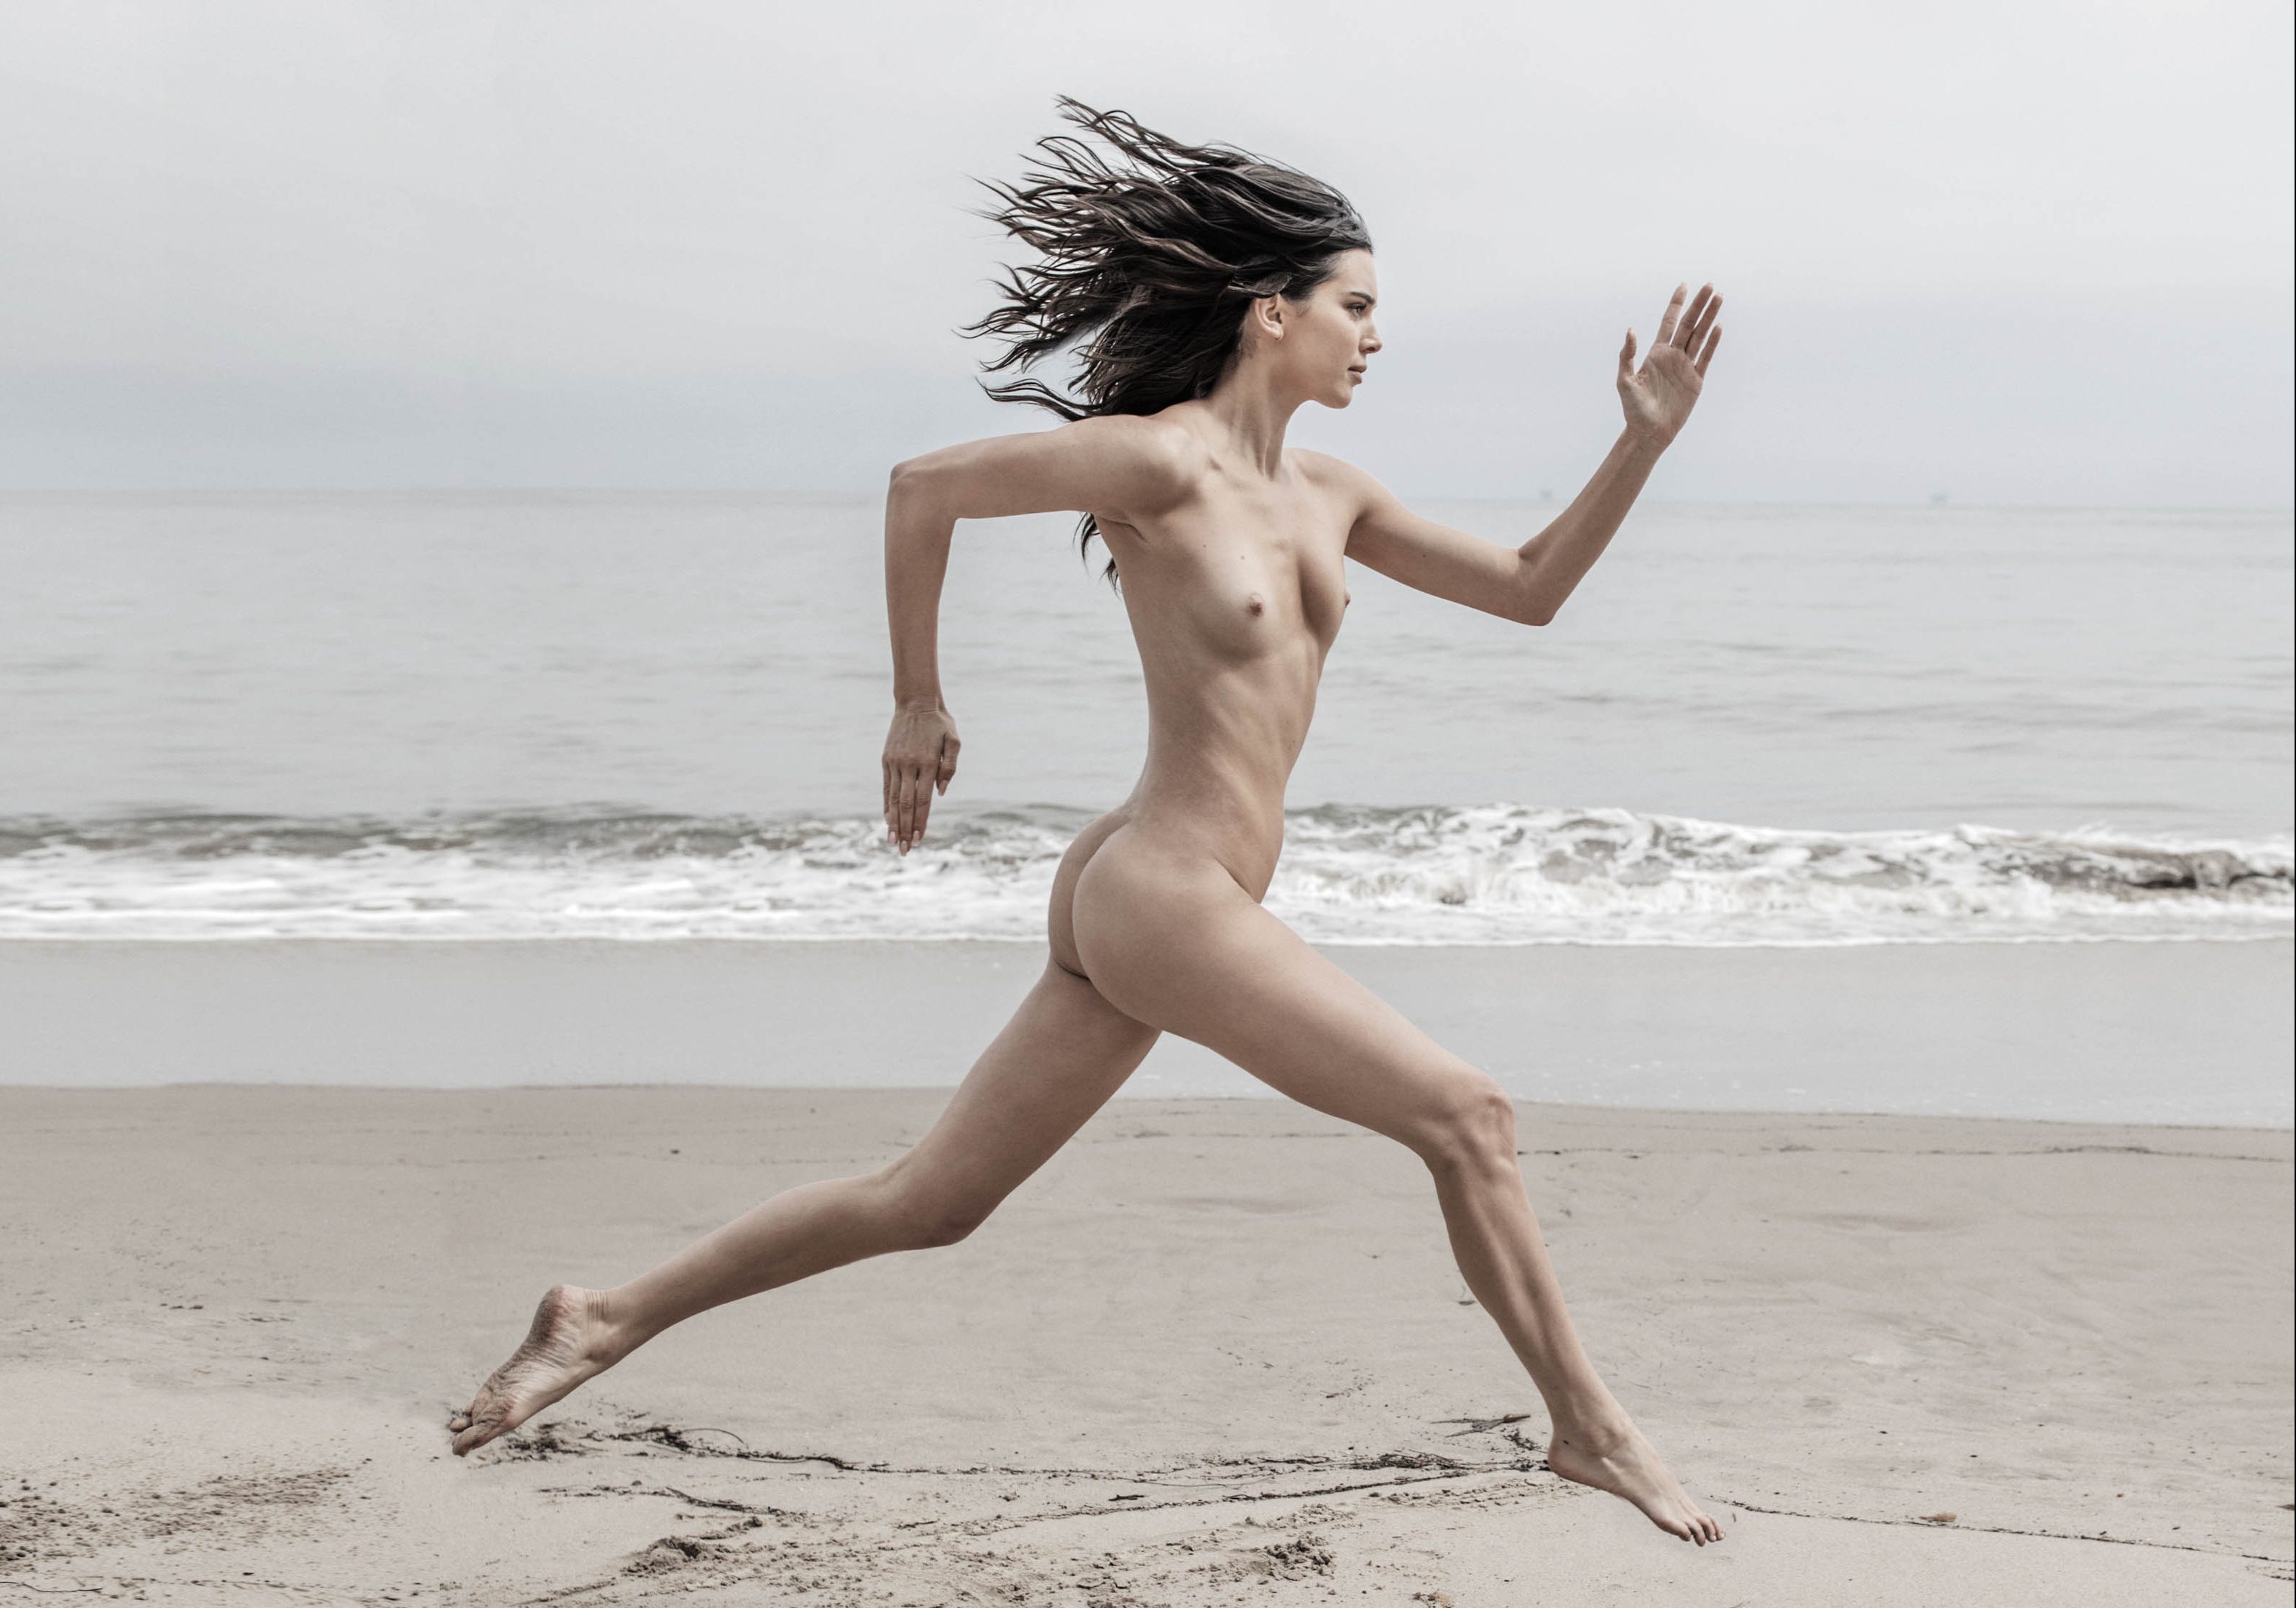 Kendall Jenner Gets Nude On A Beach